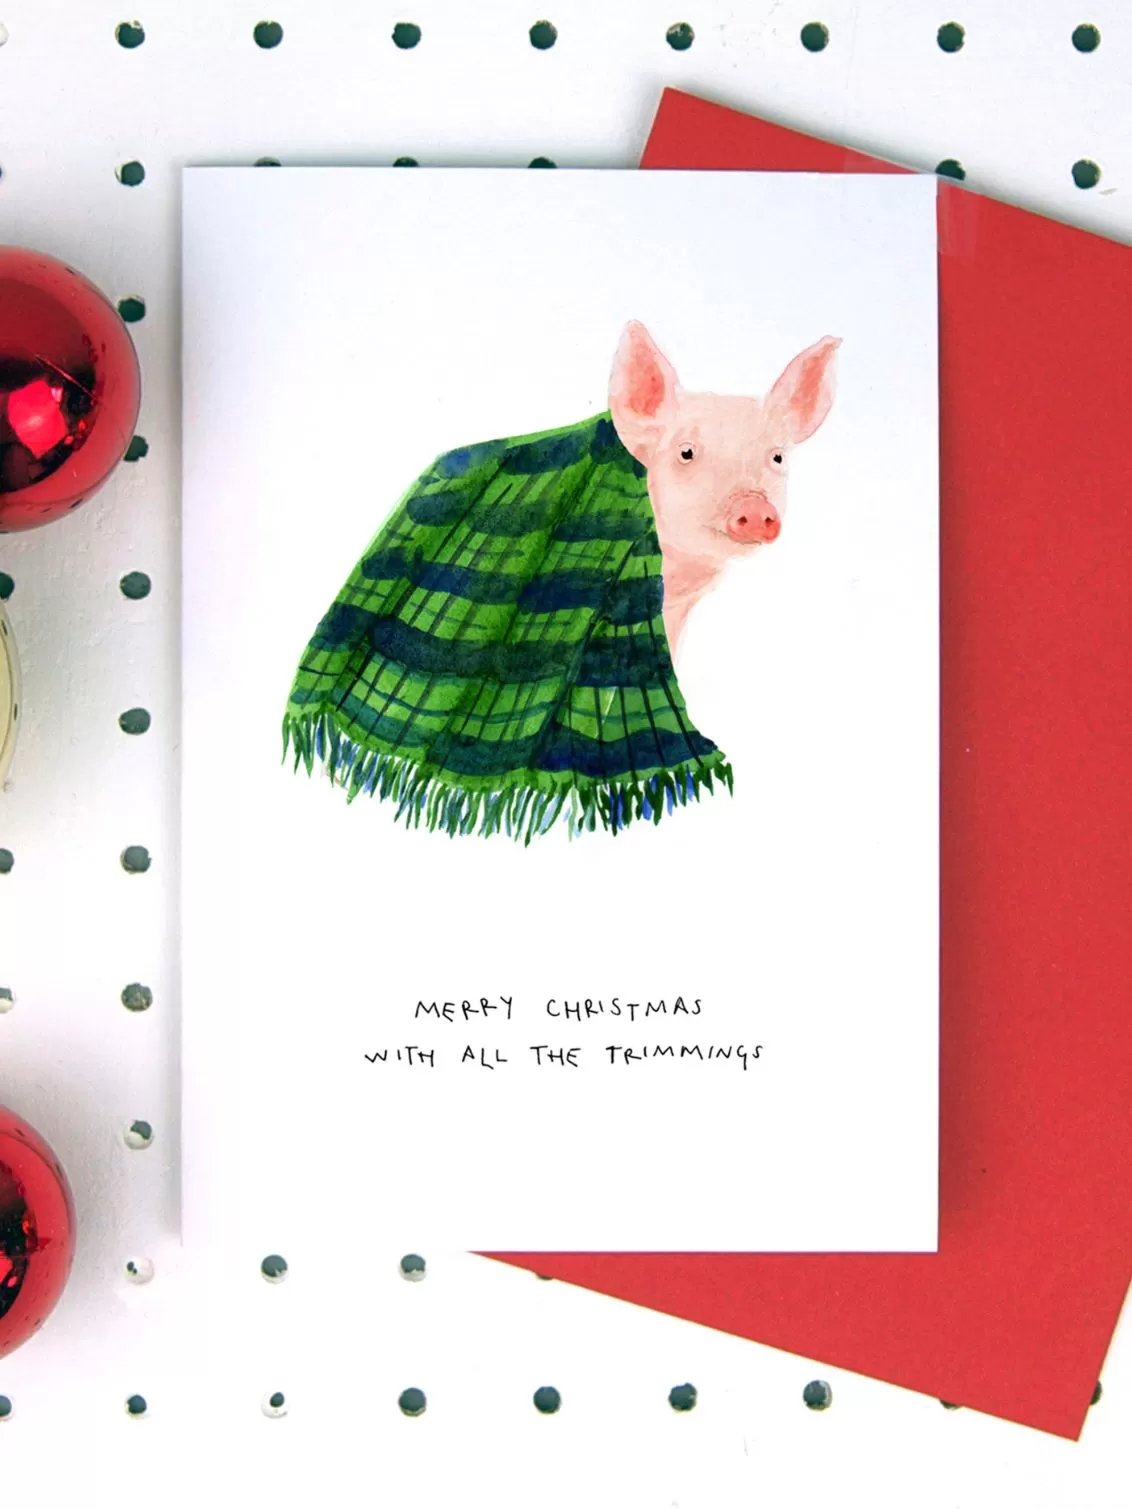 Blank Inside Pig In Blanket with Merry Christmas written underneath.